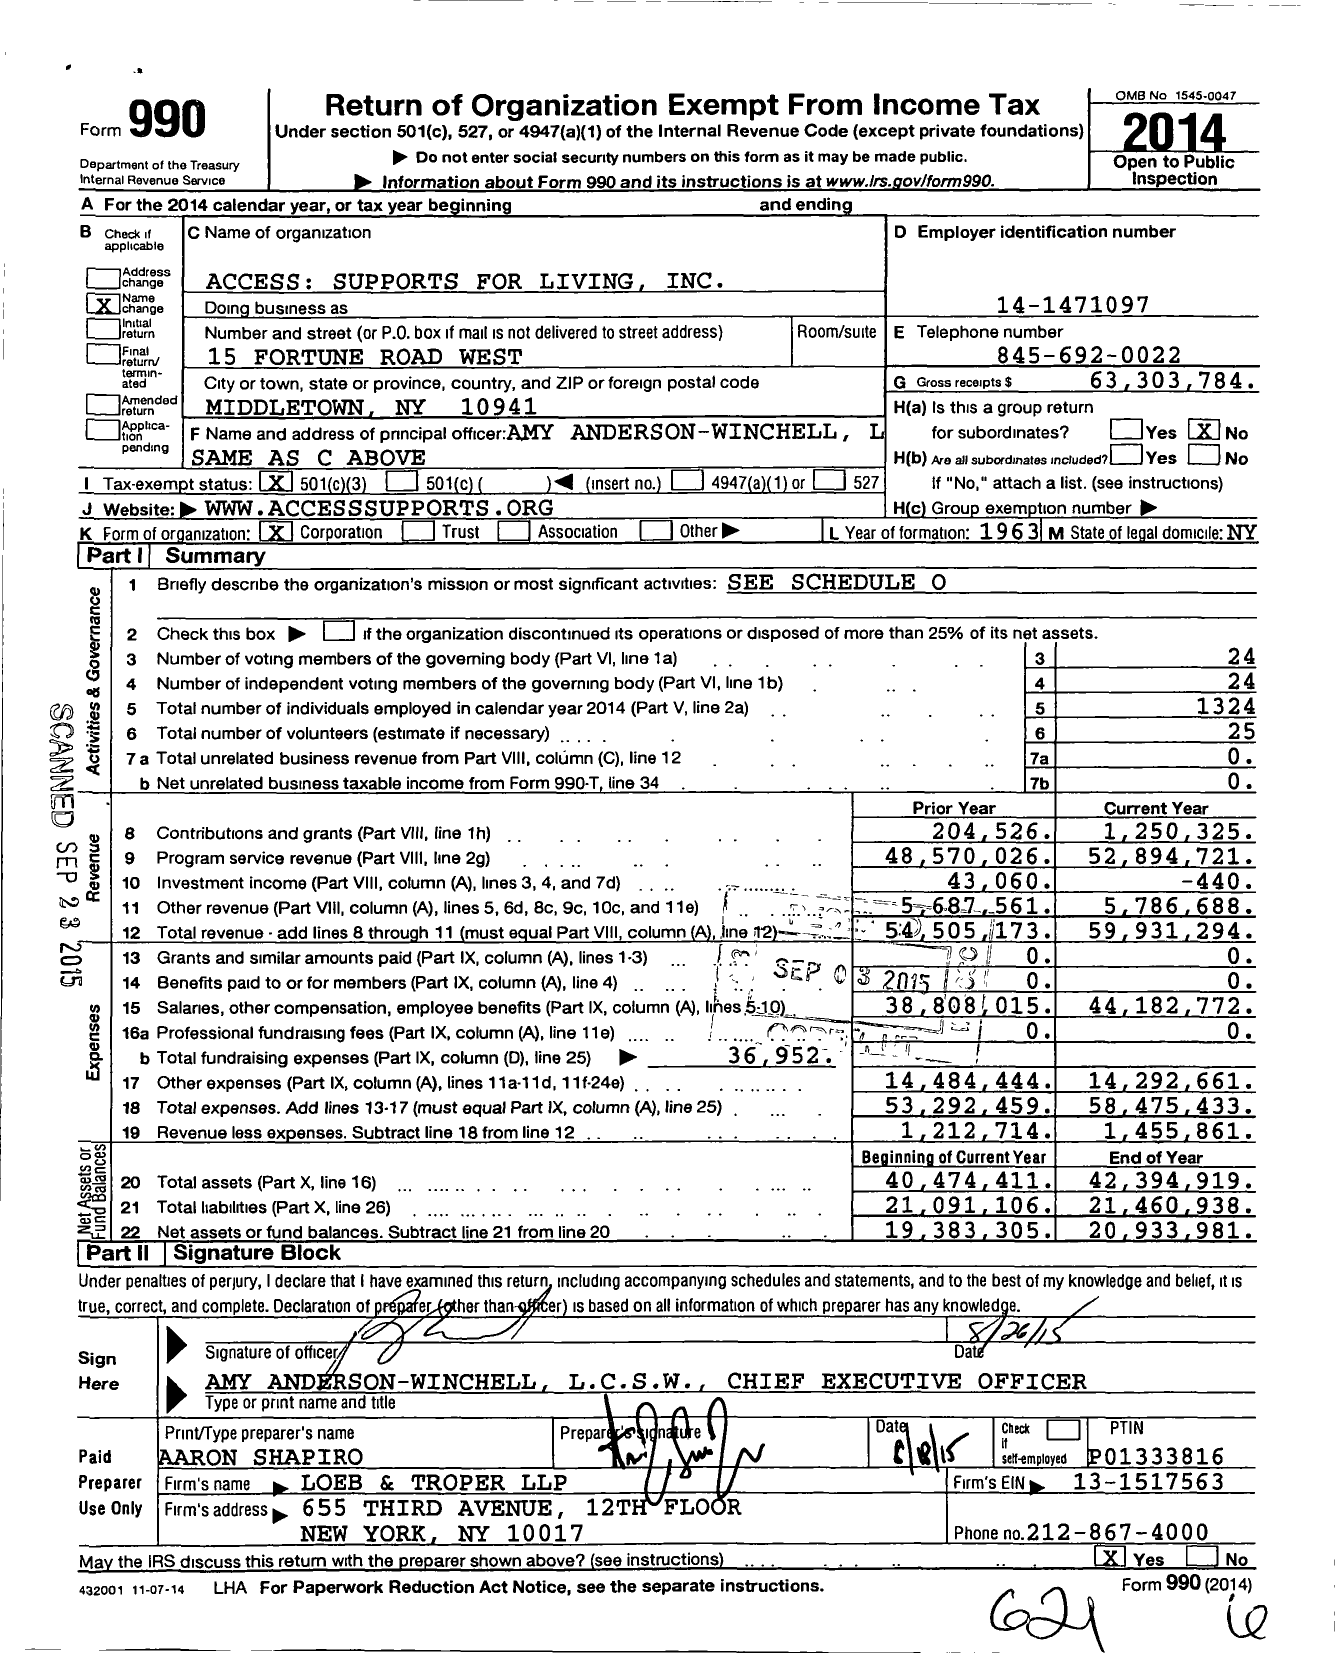 Image of first page of 2014 Form 990 for Access Supports For Living